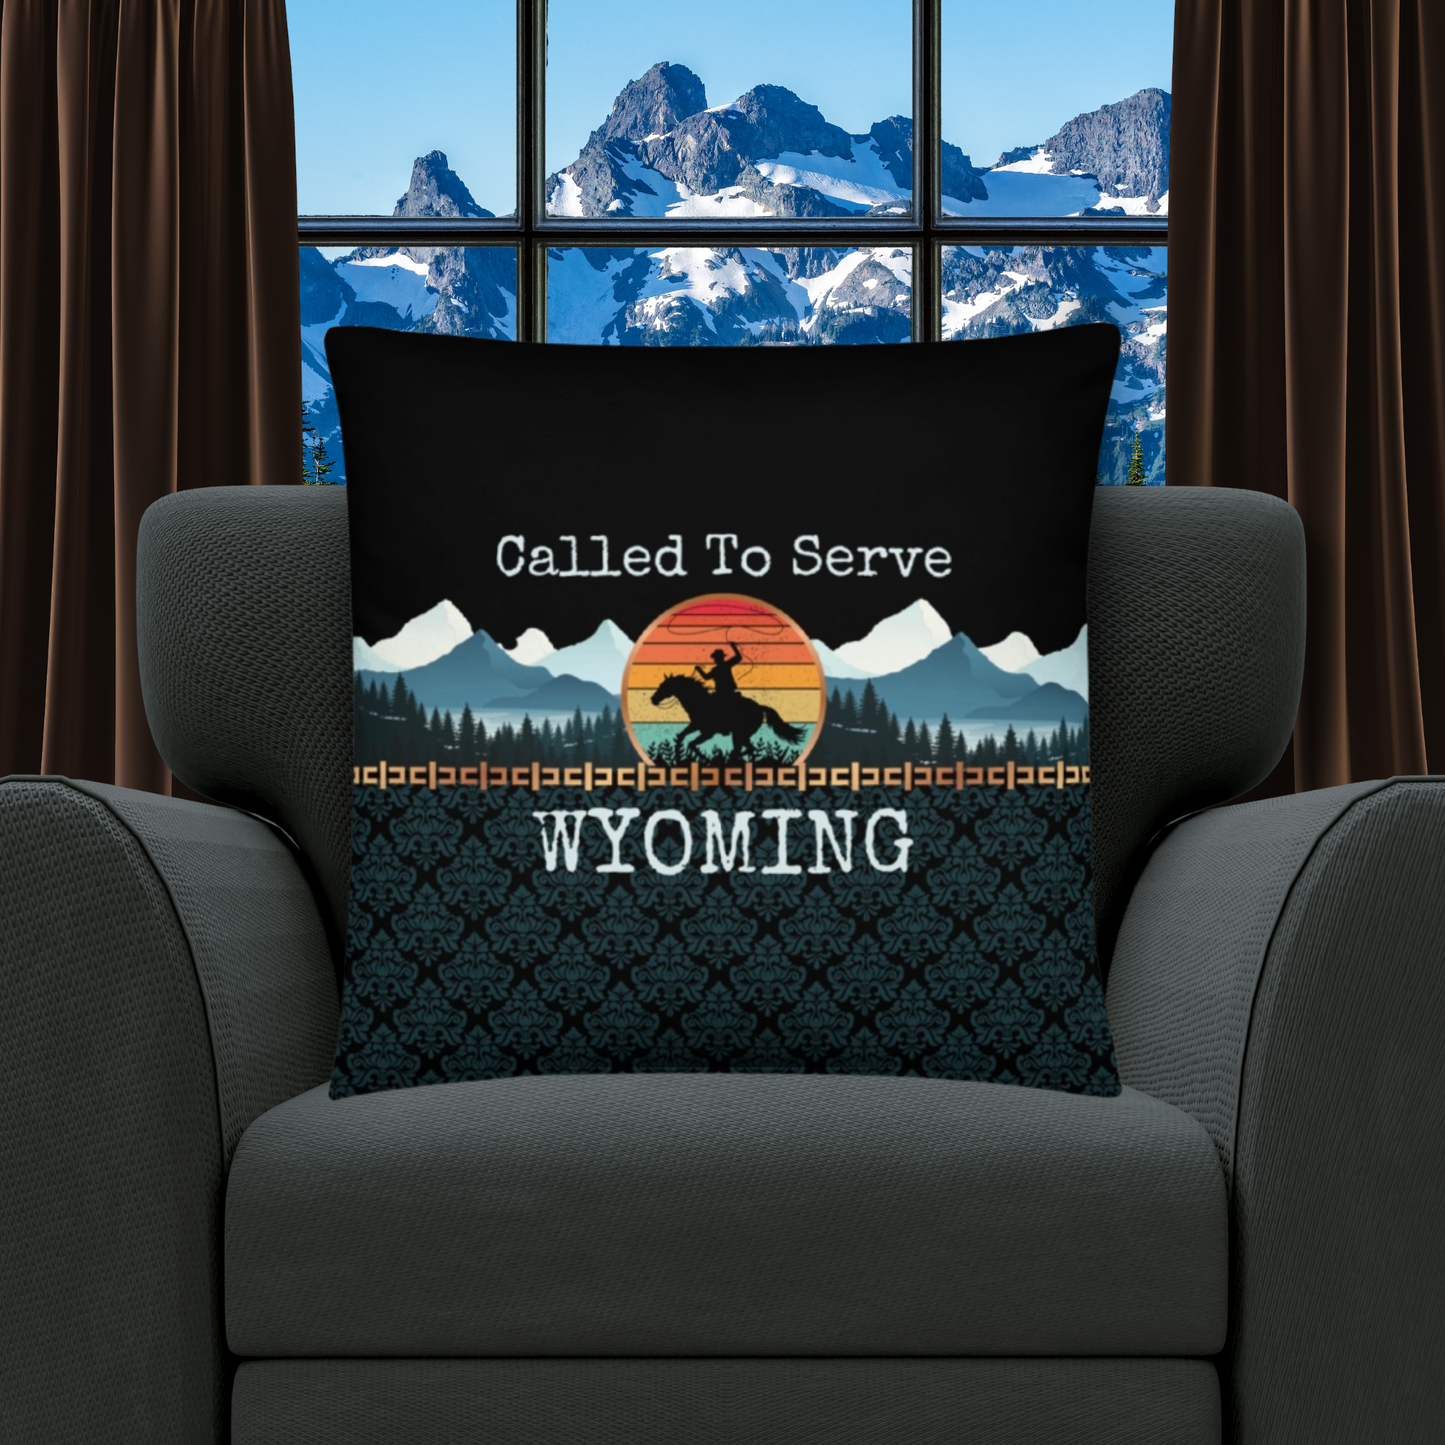 Wyoming Missionary Gift | Best Missionary Gift Ideas | Mission Call Gifts | Called to Serve Gifts | Missionary Mom Gifts | Best Latter Day Saint Gifts | LDS Missionary Gifts | Wyoming Home Décor